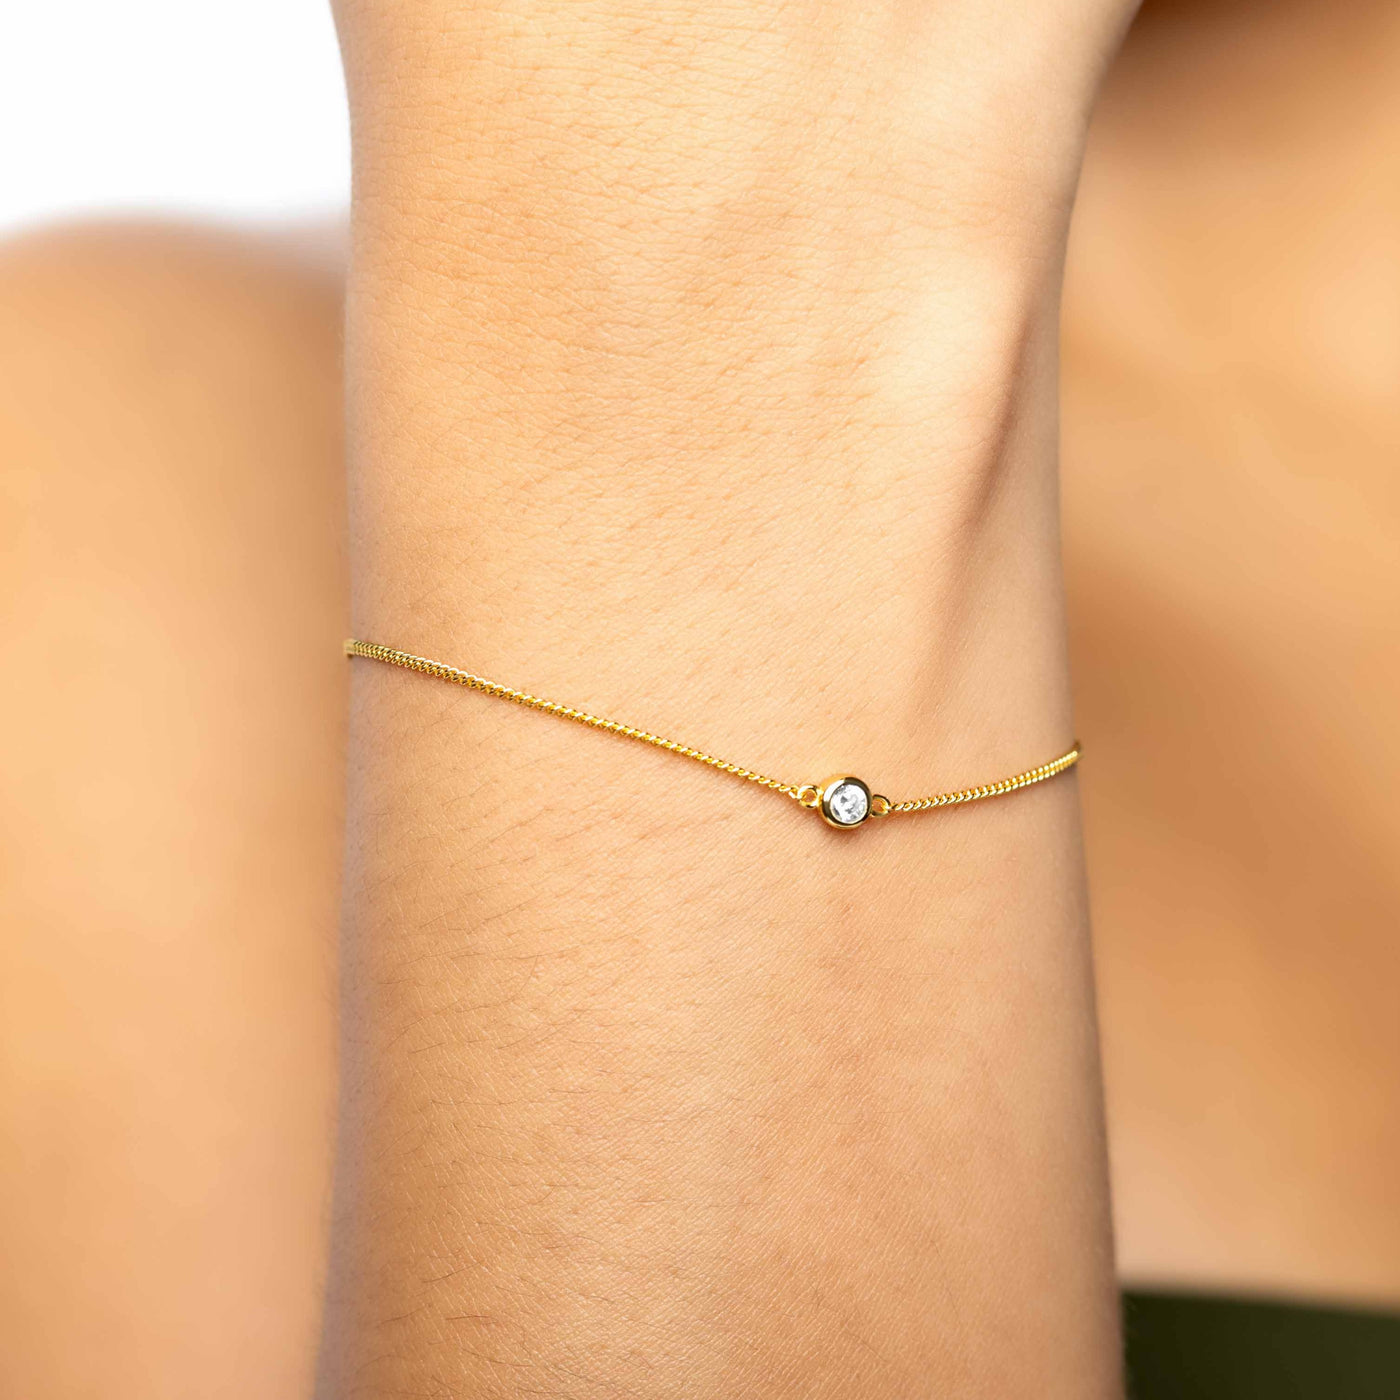  Modern Simple Minimalist Jewelry Women's Bracelet Baby Curb Chain 18k Gold Layered on 925 Sterling Silver with a Diamond CZ